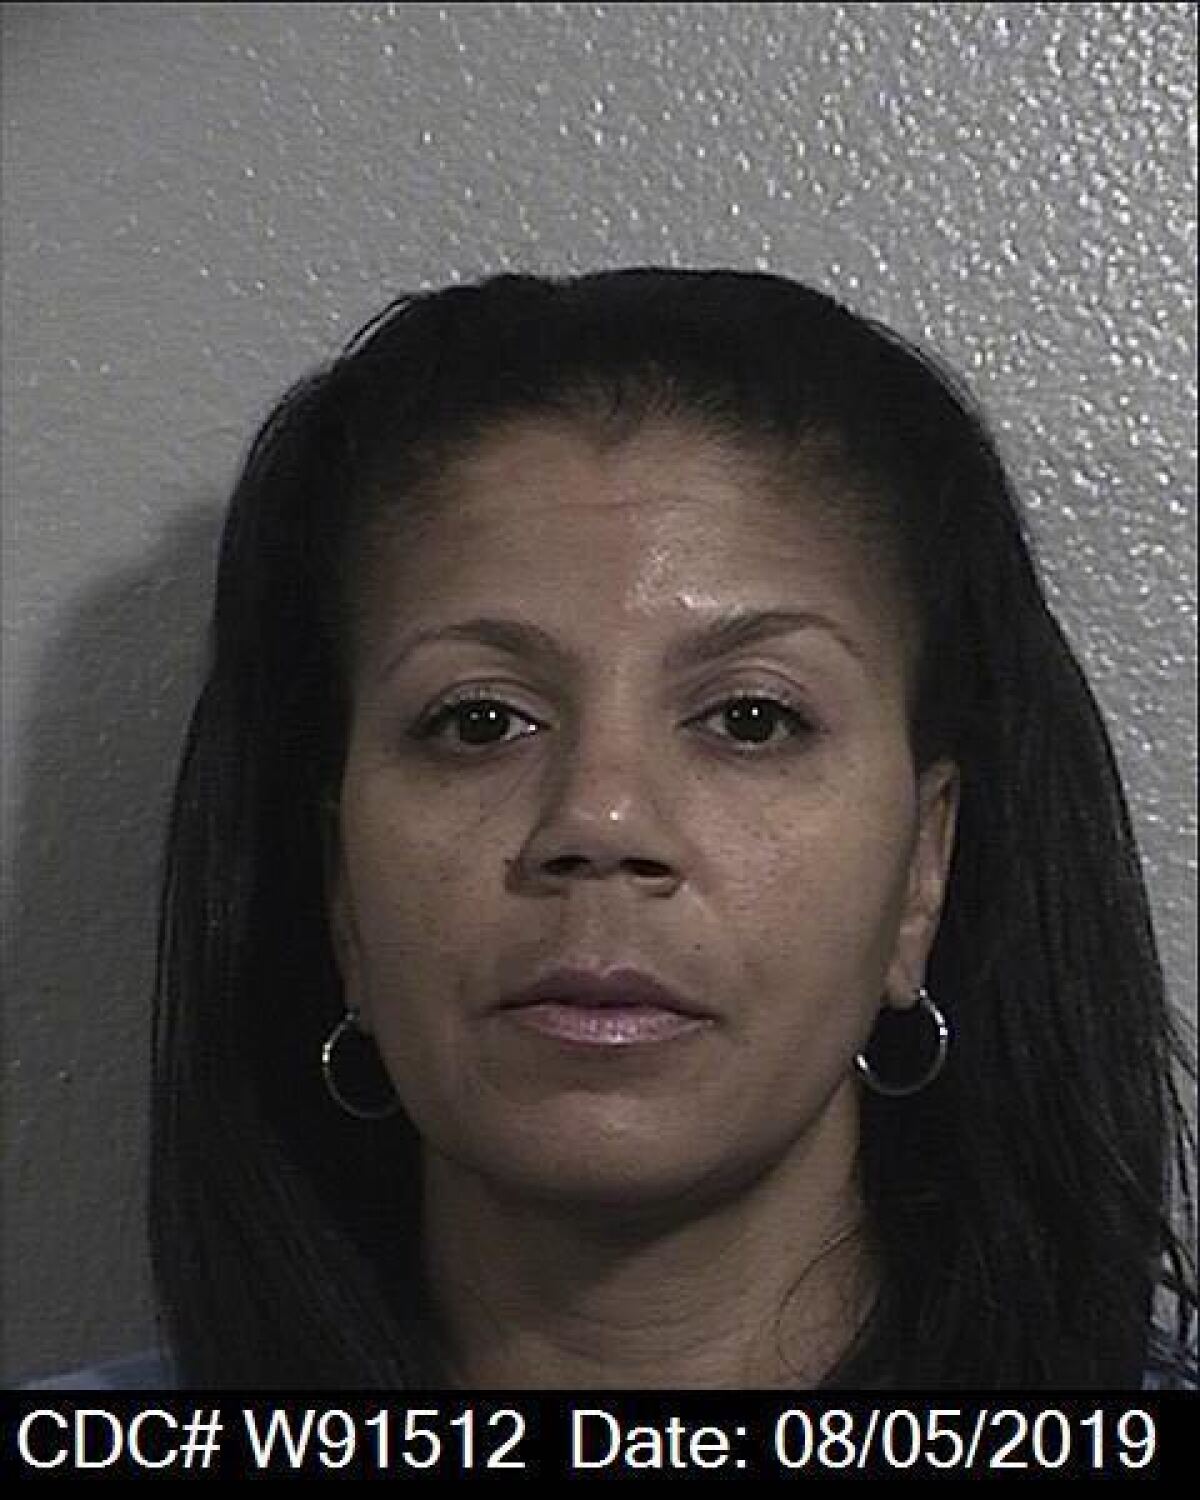 Terebea Williams, 44, was given an emergency COVID-19 release from prison on July 29.